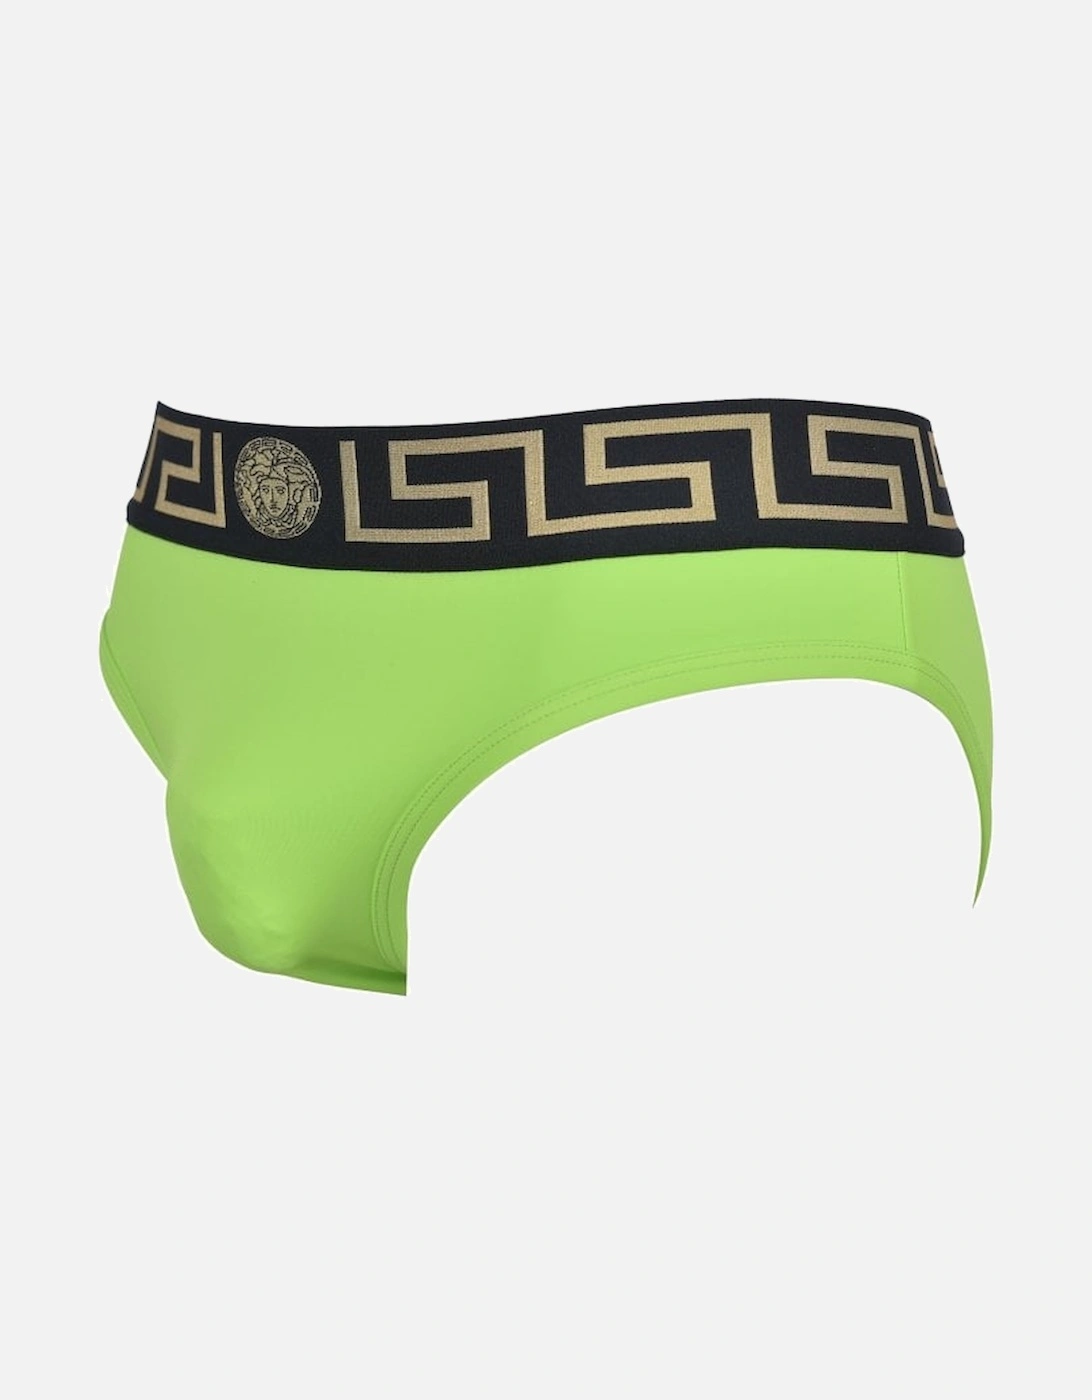 Iconic Luxe Swim Briefs, Lime/black/gold